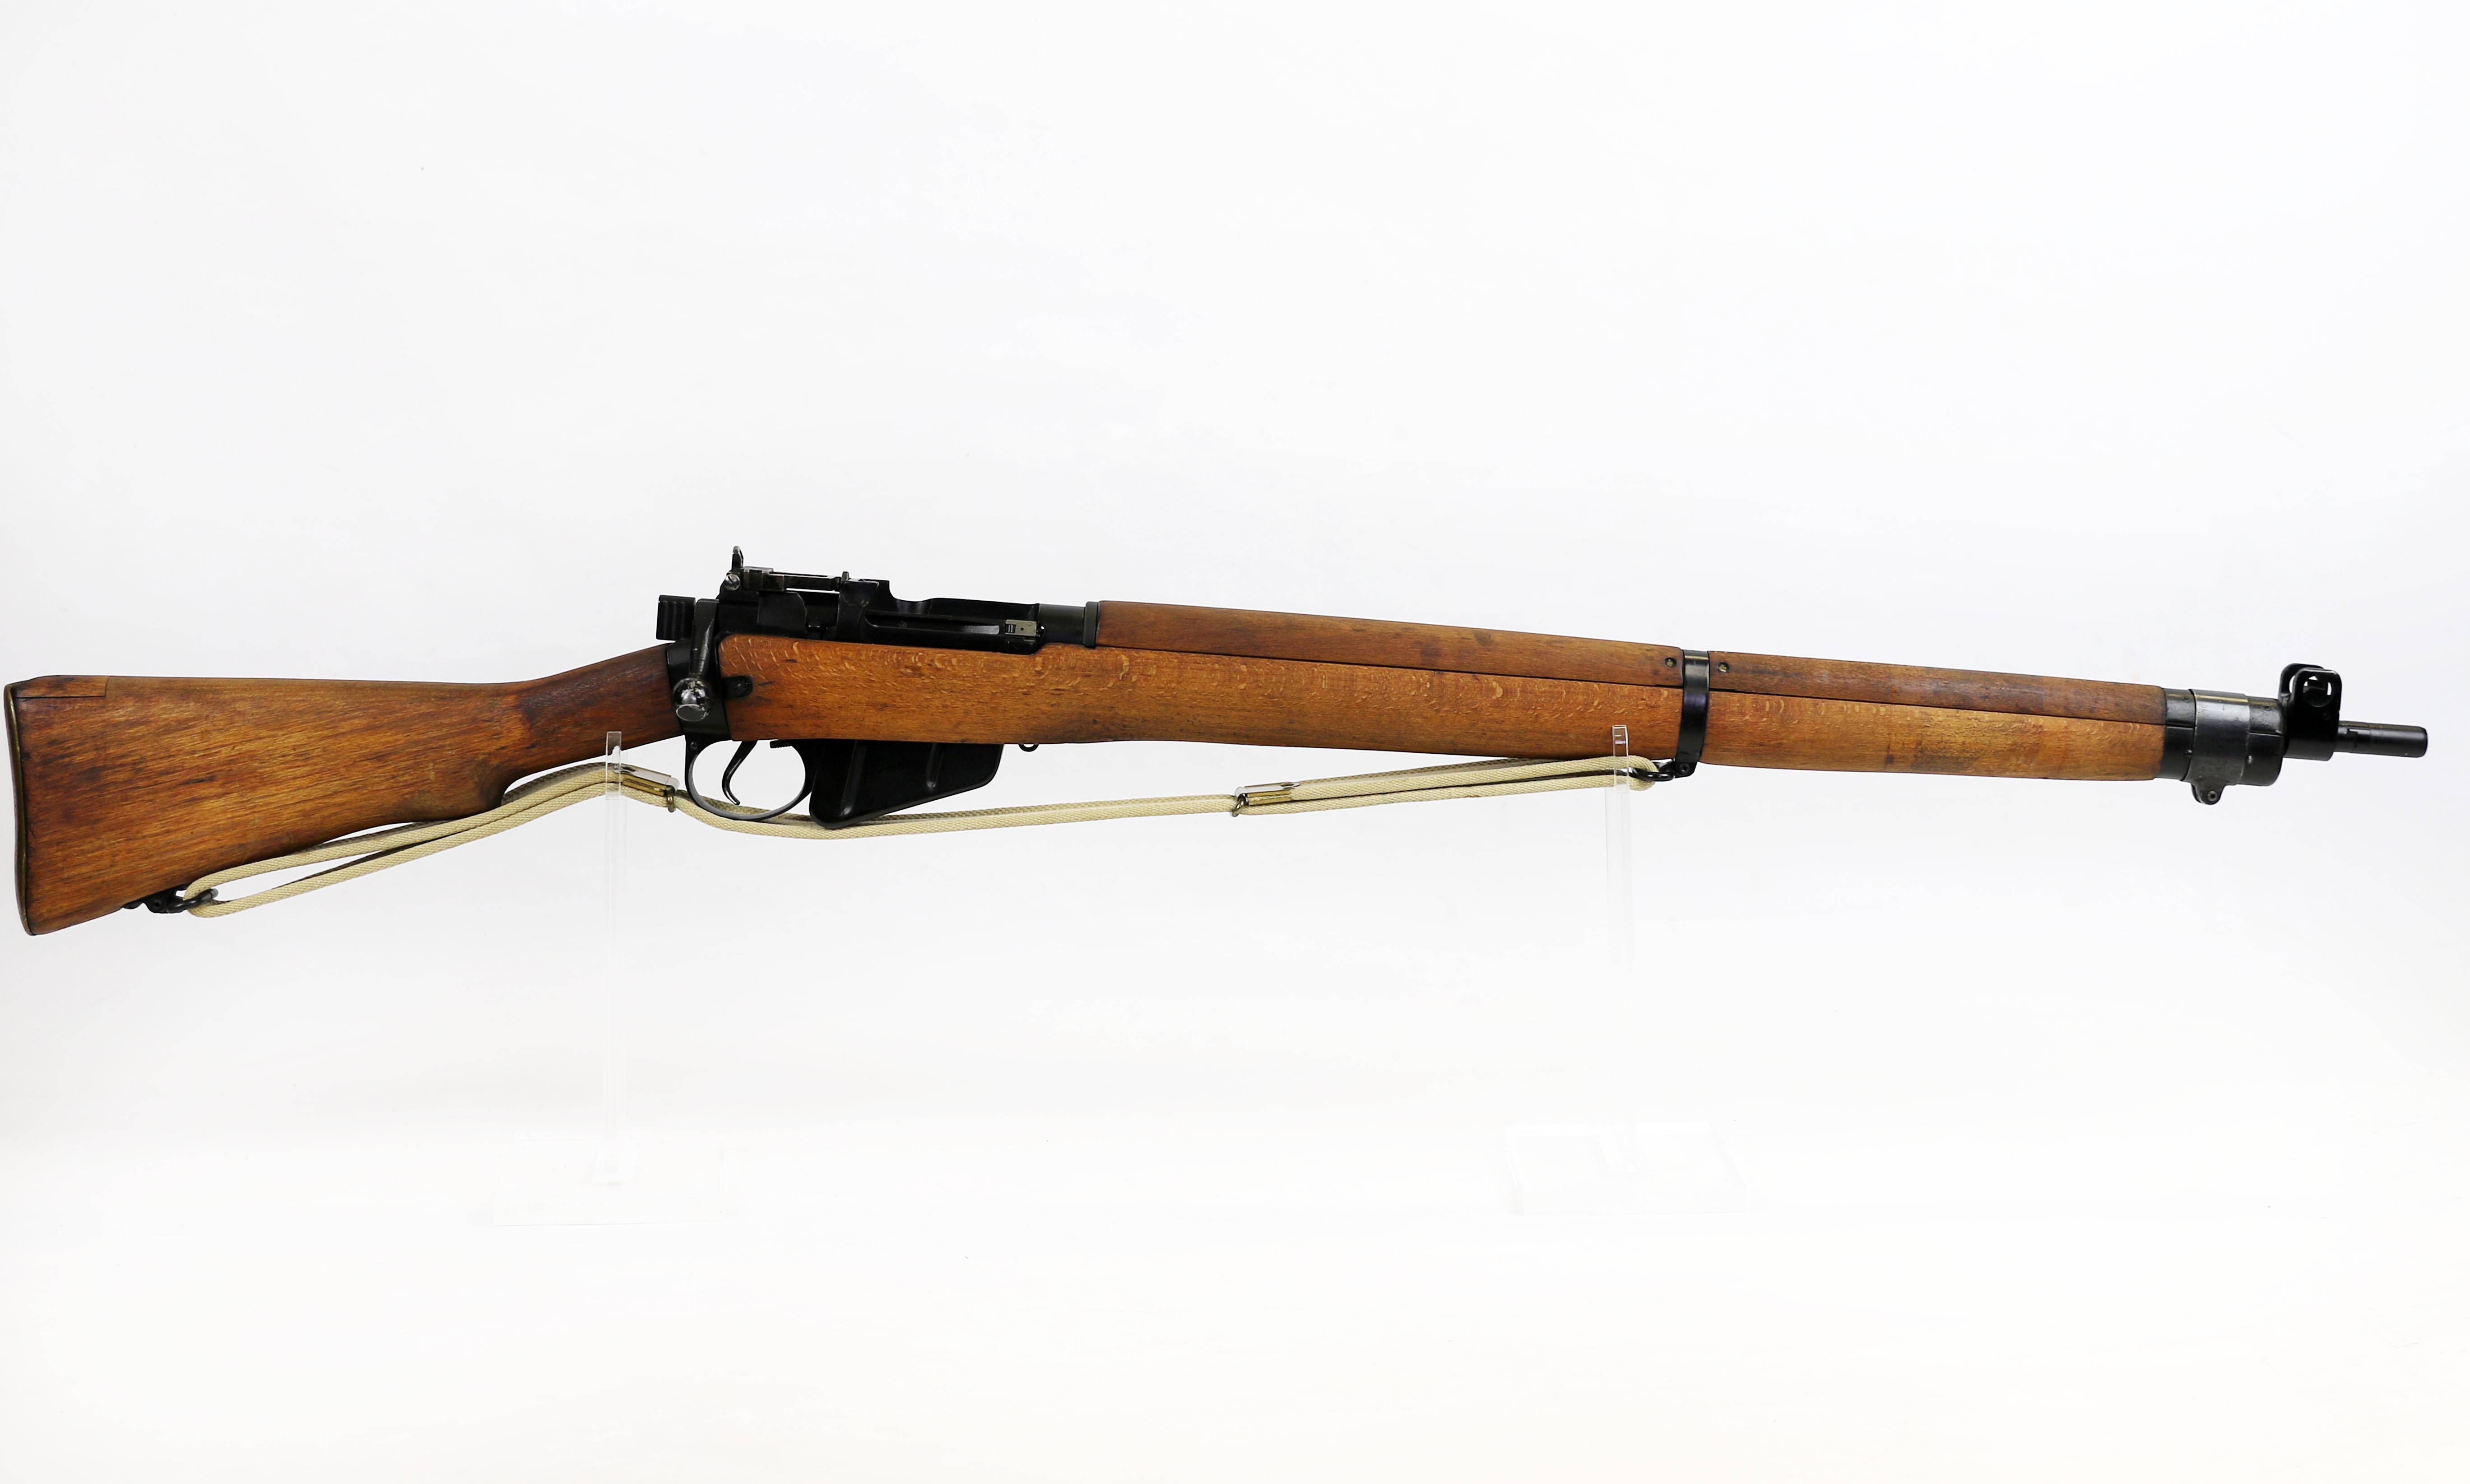 Value of a Enfield Mod 4 Mk I?